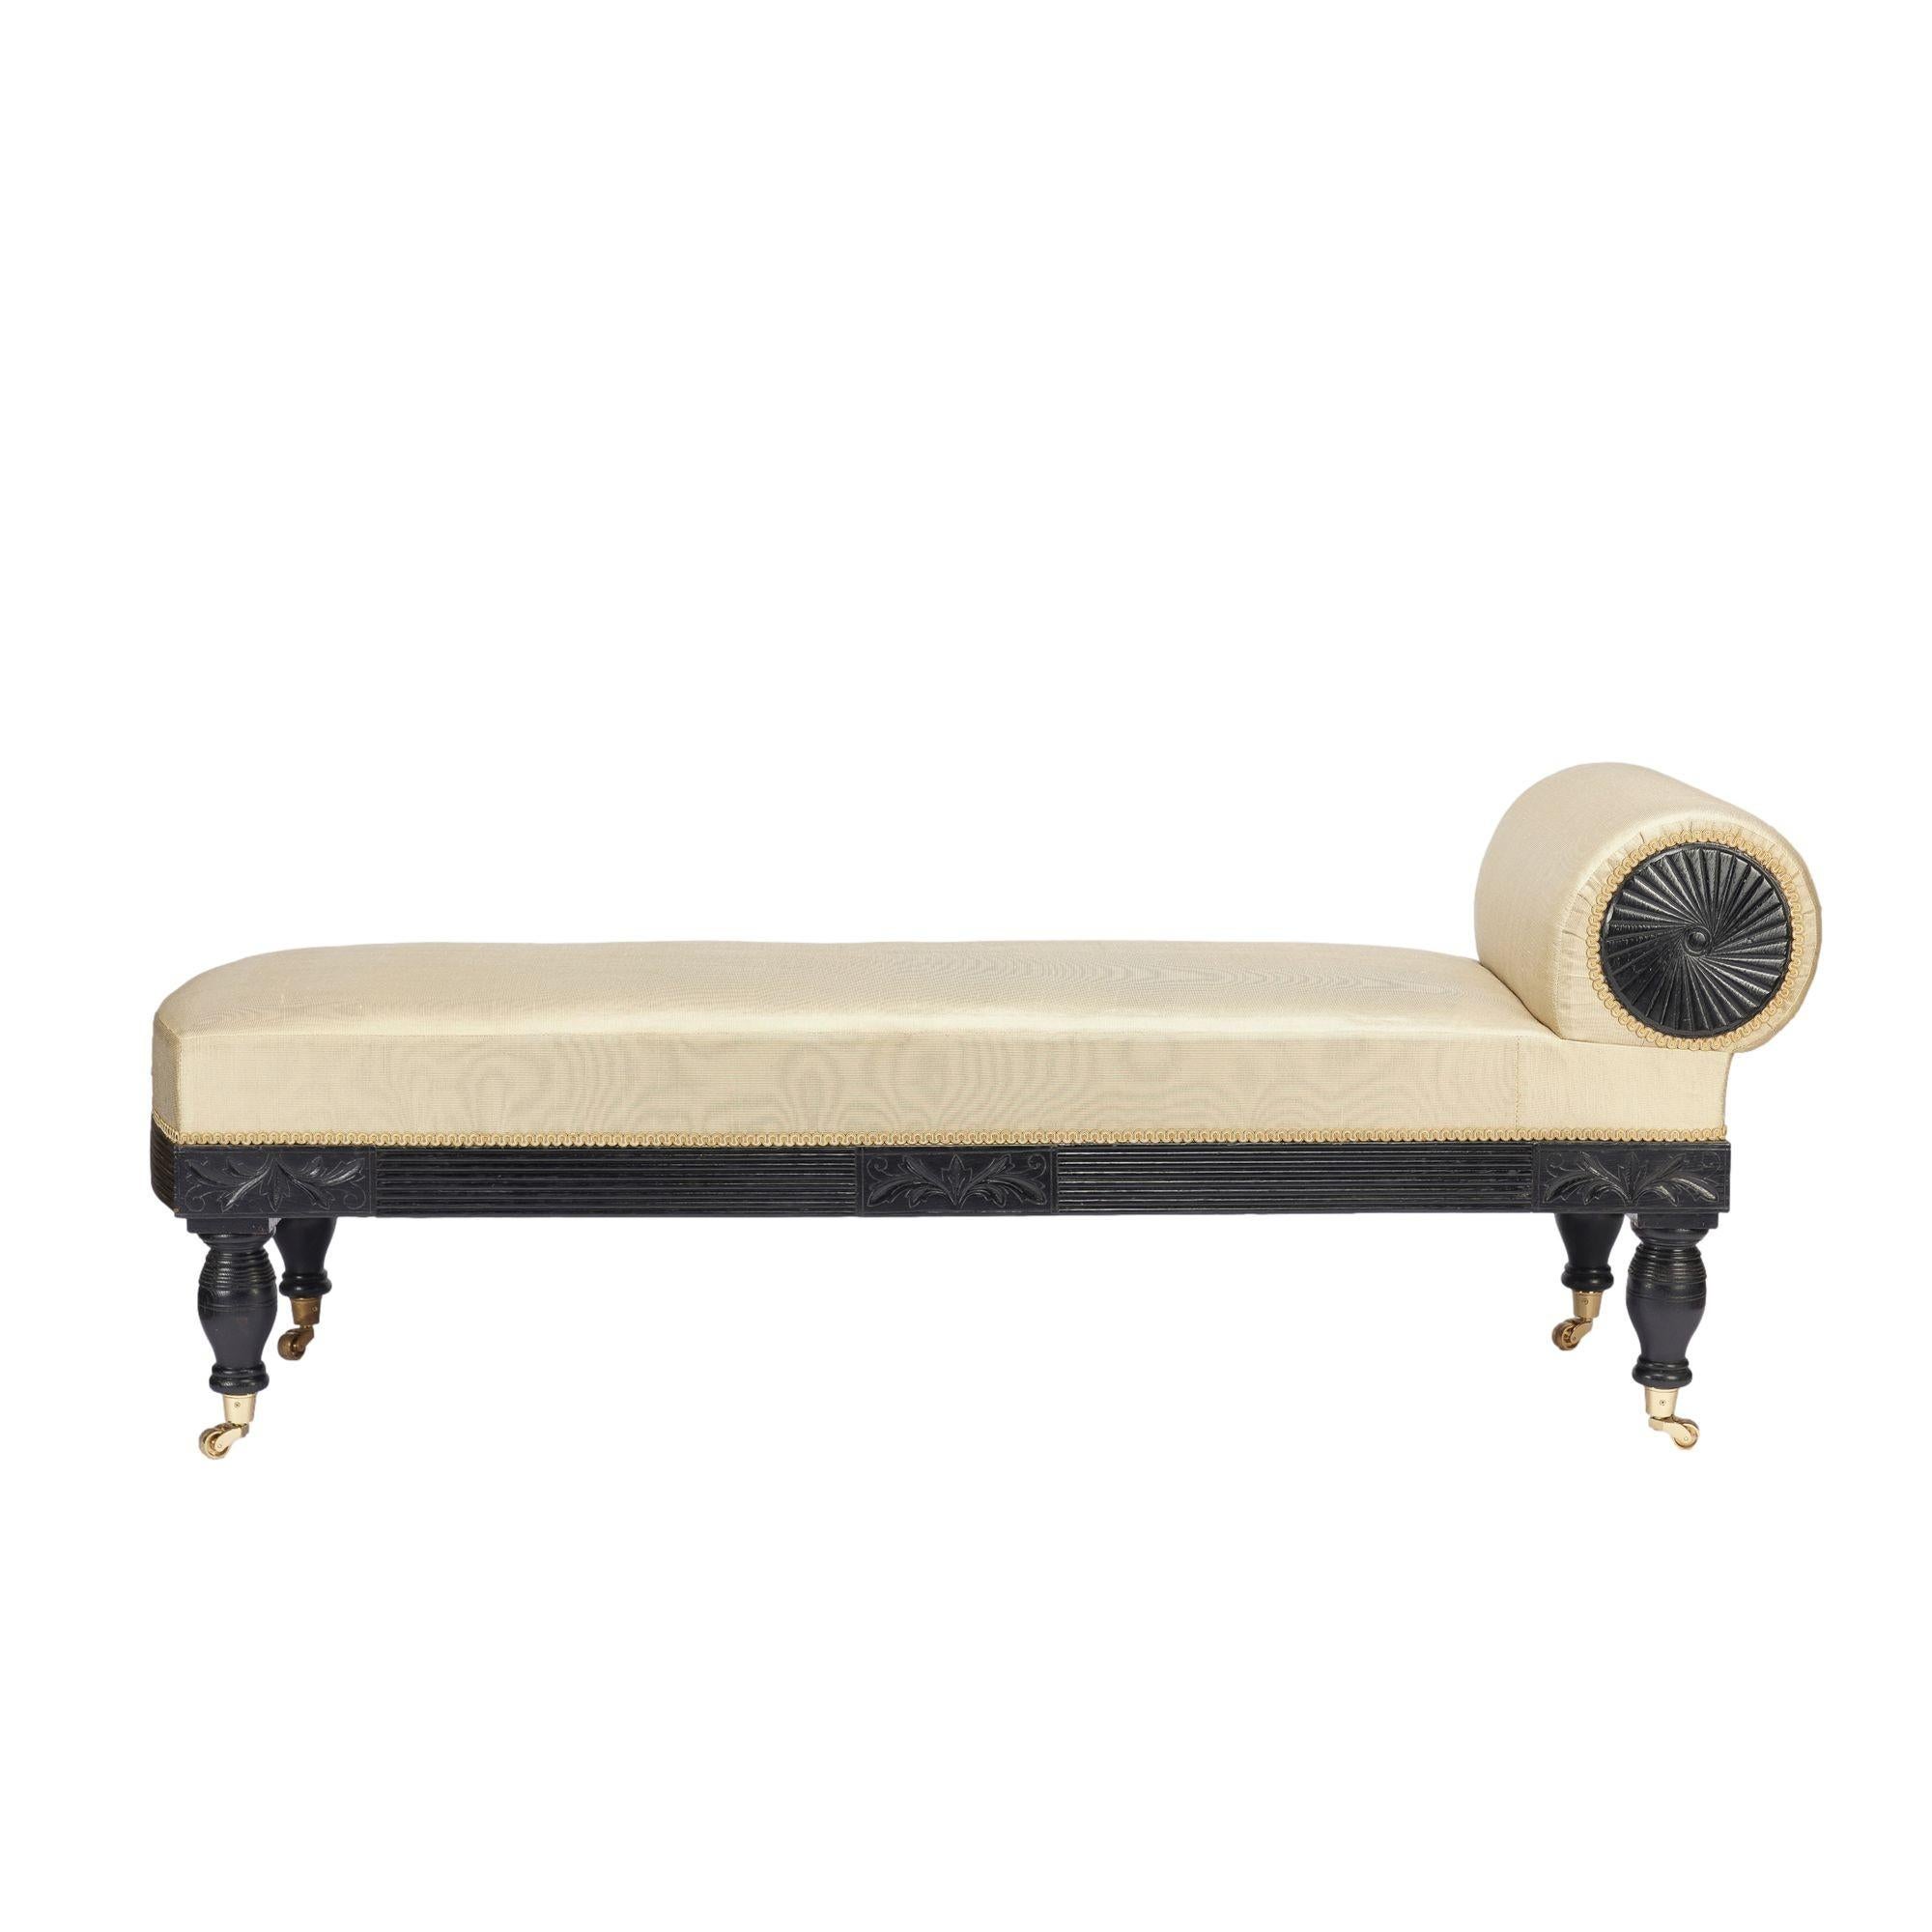 Signed American Eastlake upholstered chaise with an ebonized and reeded maple frame resting on four turned legs fitted with cast brass cup casters. Both sides of the bolster are fitted with round, ebonized panels that match the frame, and feature a